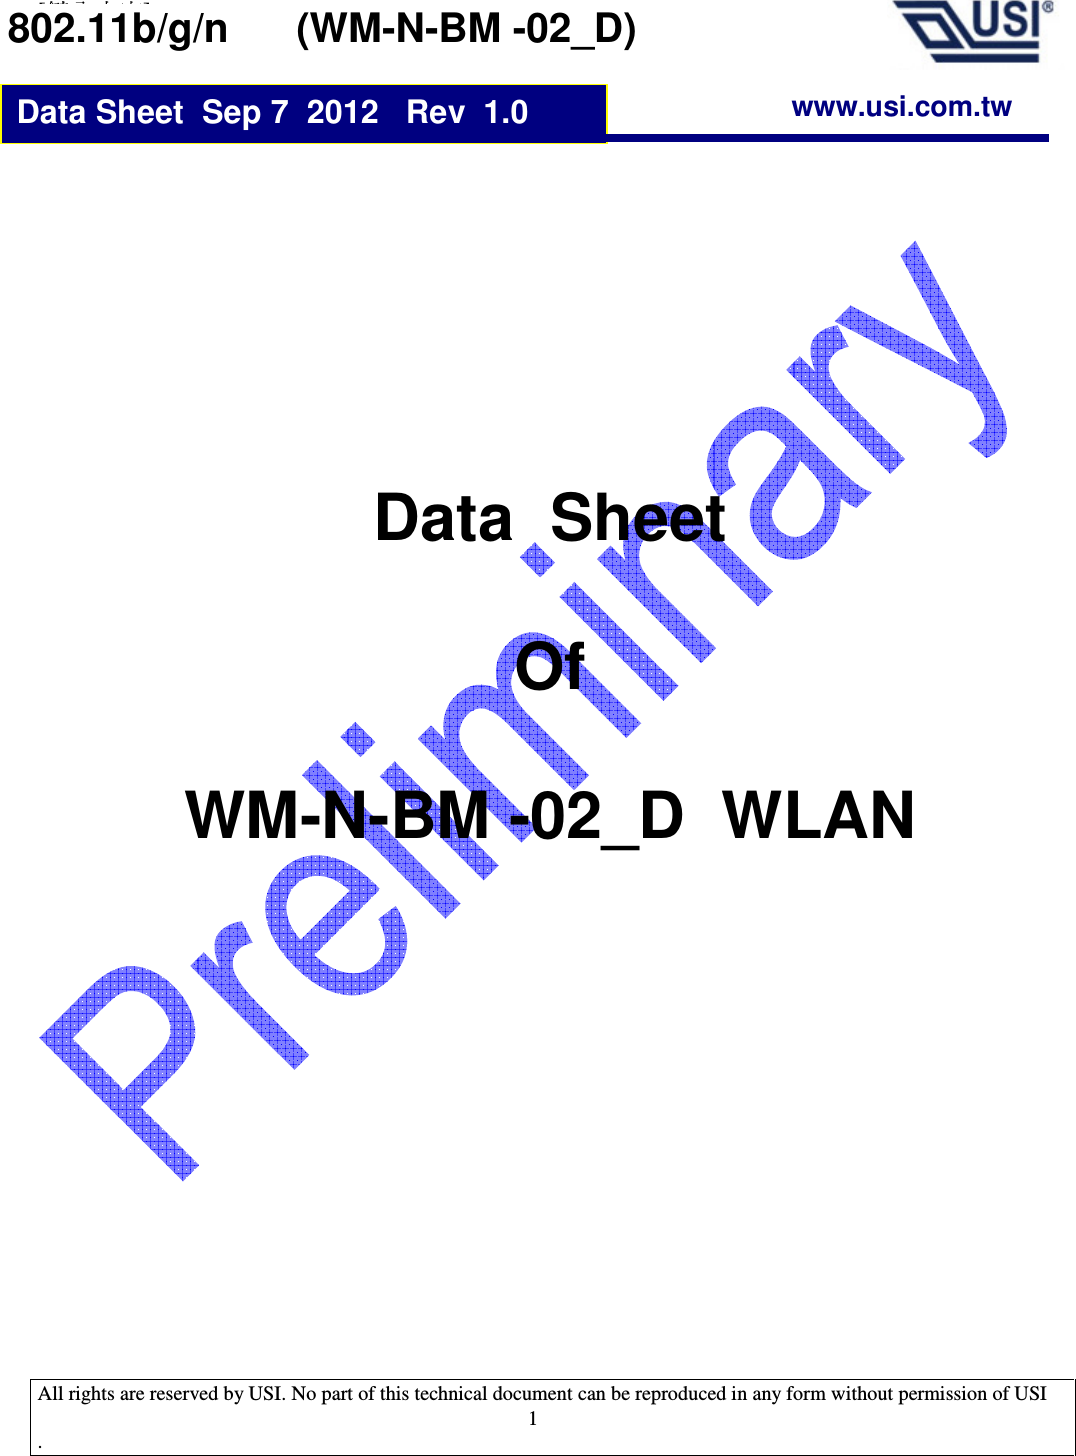 [ ]  All rights are reserved by USI. No part of this technical document can be reproduced in any form without permission of USI .                                    1               Data  Sheet  Of  WM-N-BM -02_D  WLAN    Data Sheet  Sep 7  2012   Rev  1.0 802.11b/g/n      (WM-N-BM -02_D)   www.usi.com.tw 